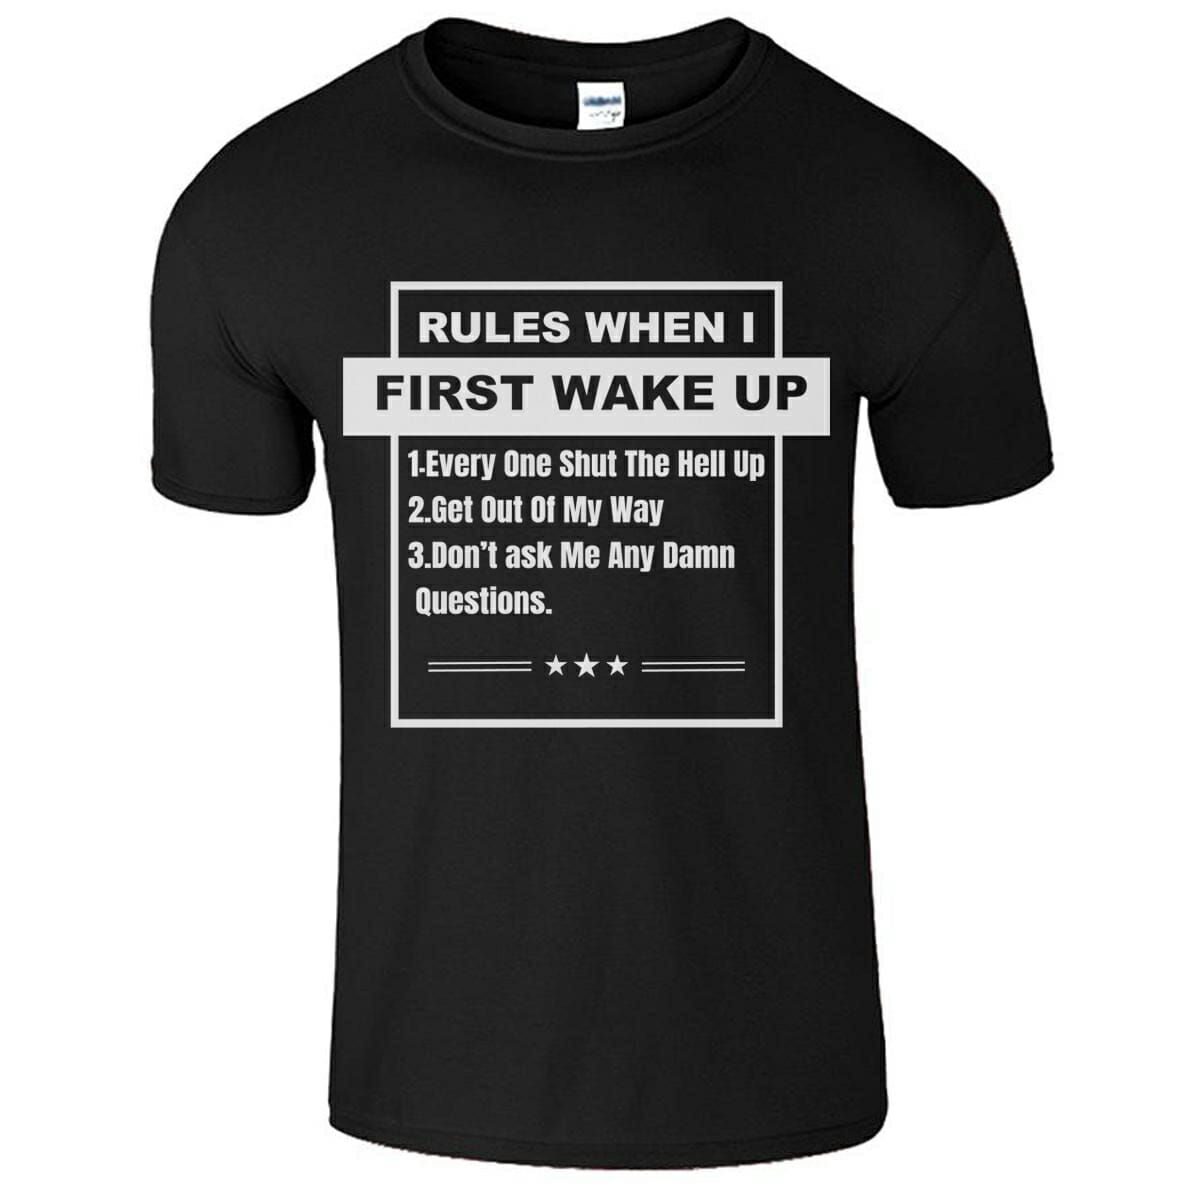 Rules When I First Wake Up - Funny T-Shirt Design